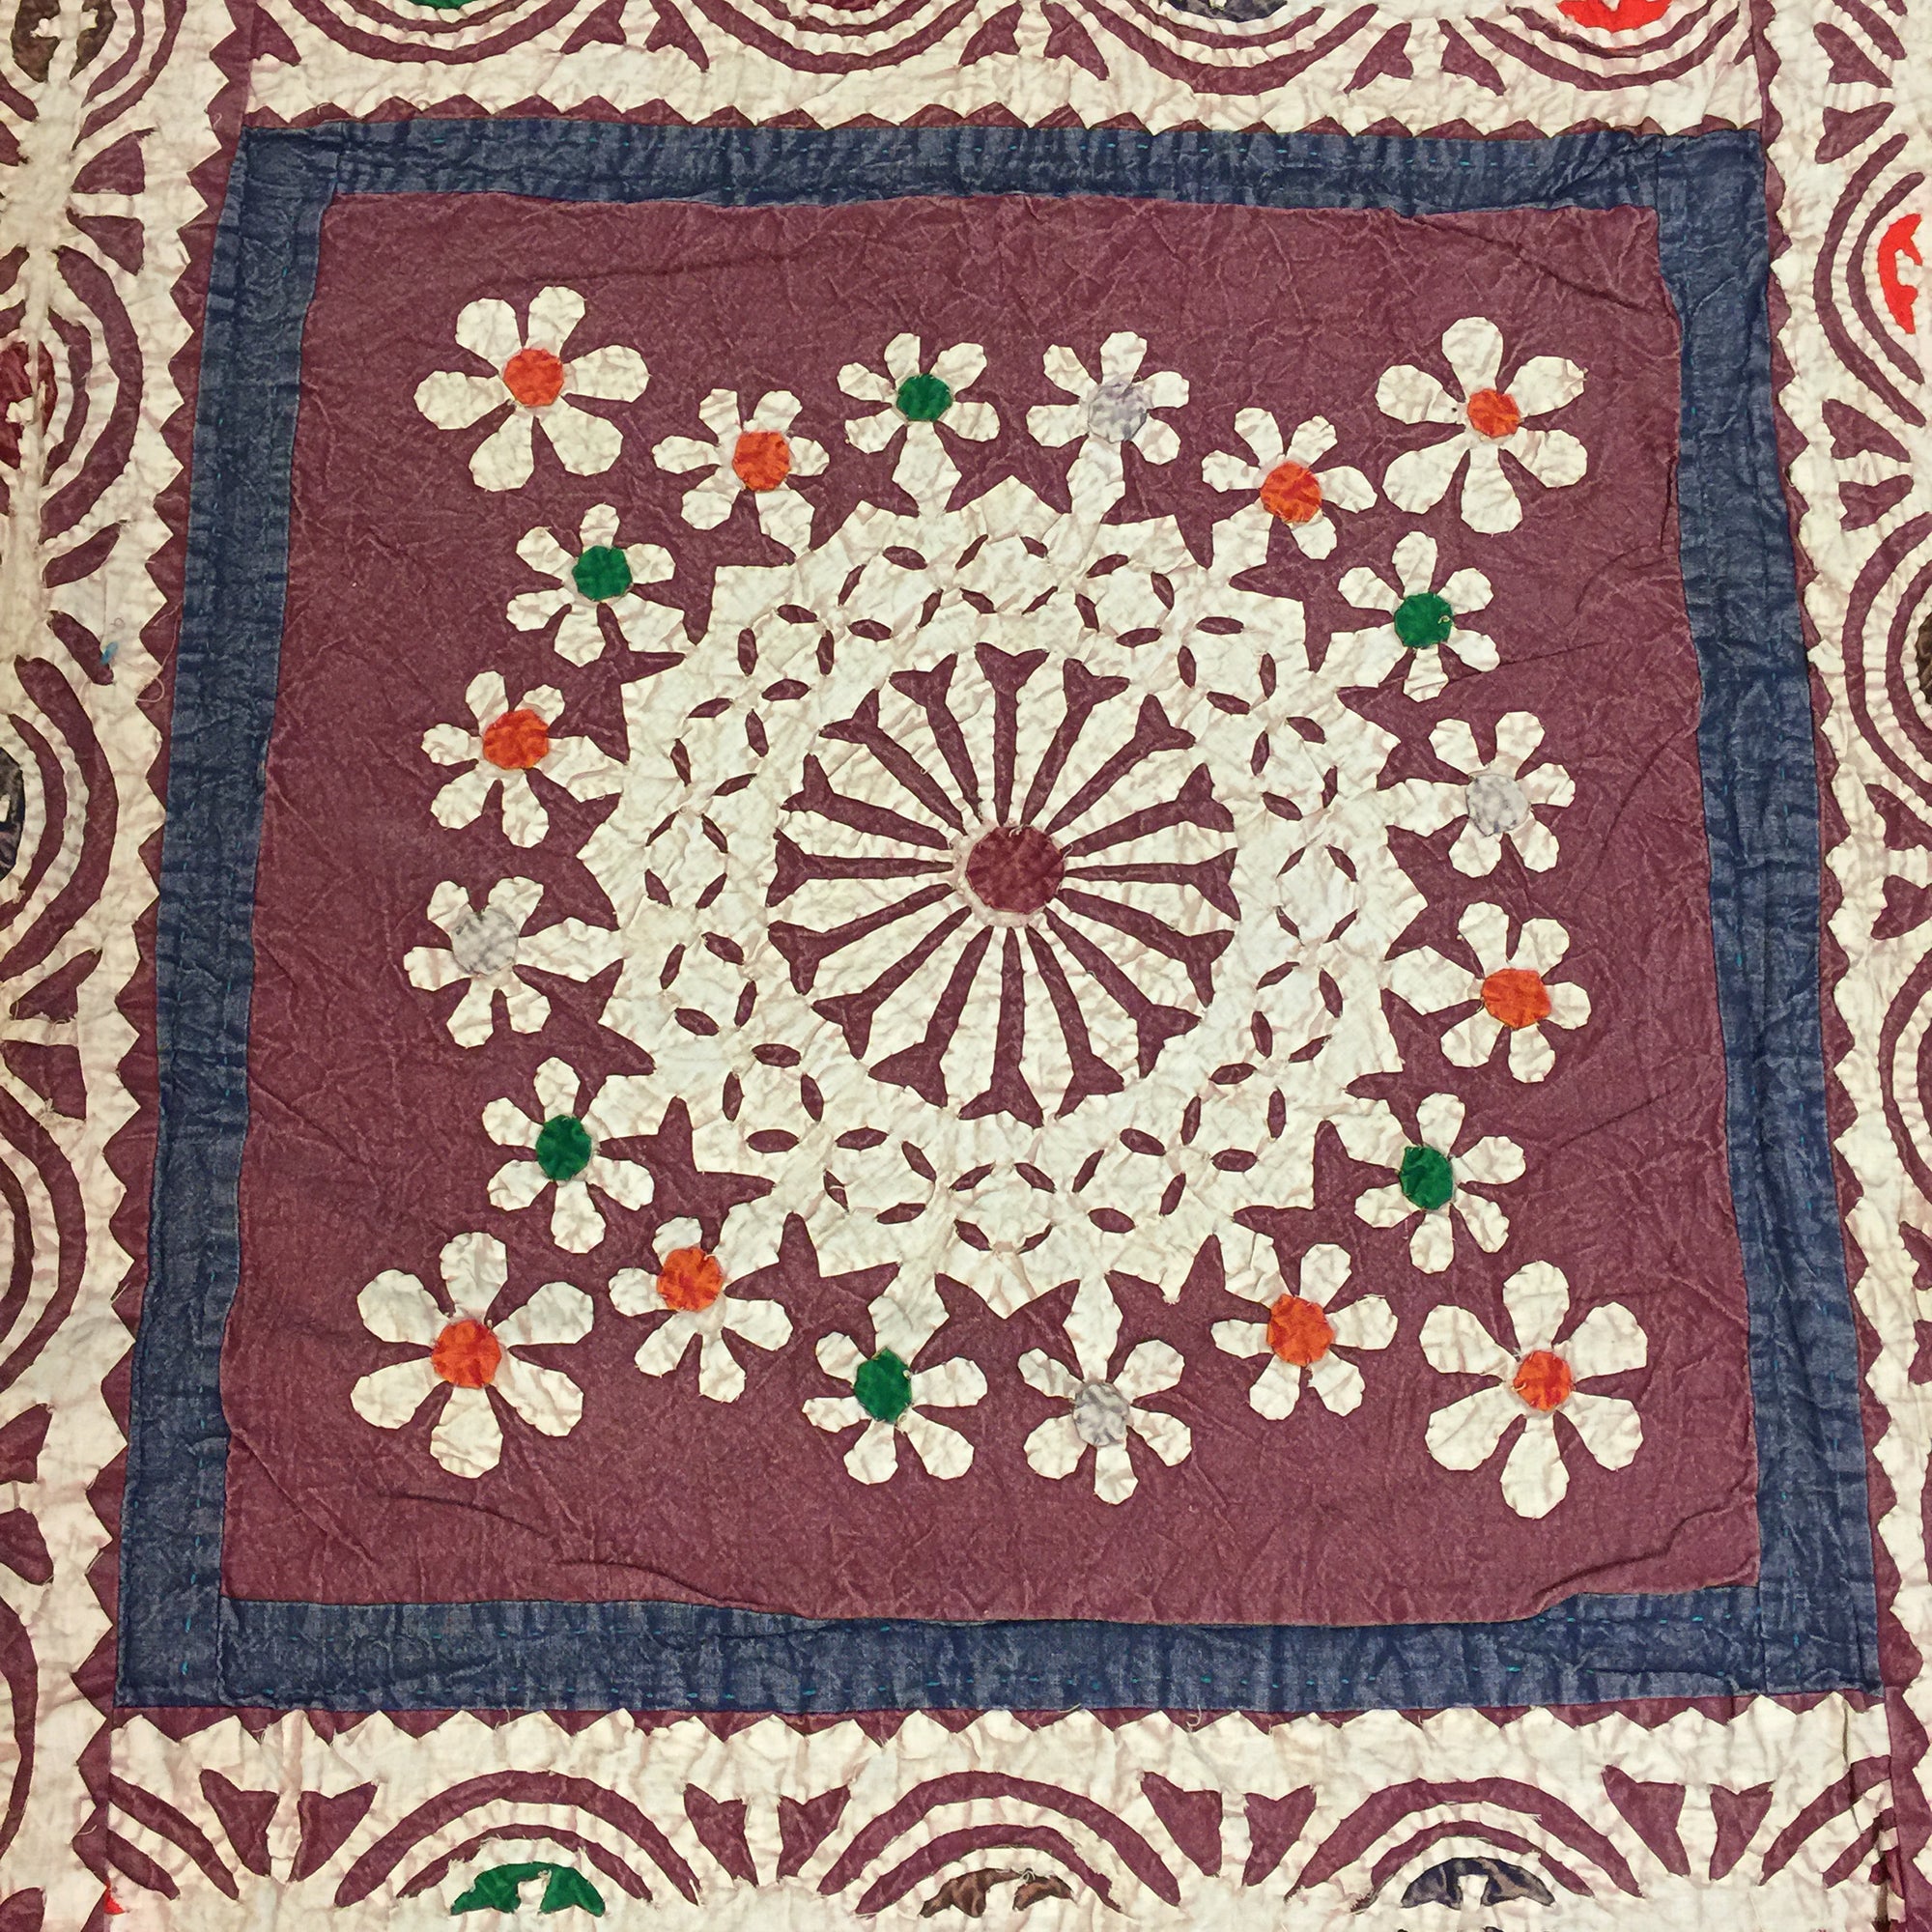 Hand made Cutout Bedcover 3 - Vintage India NYC